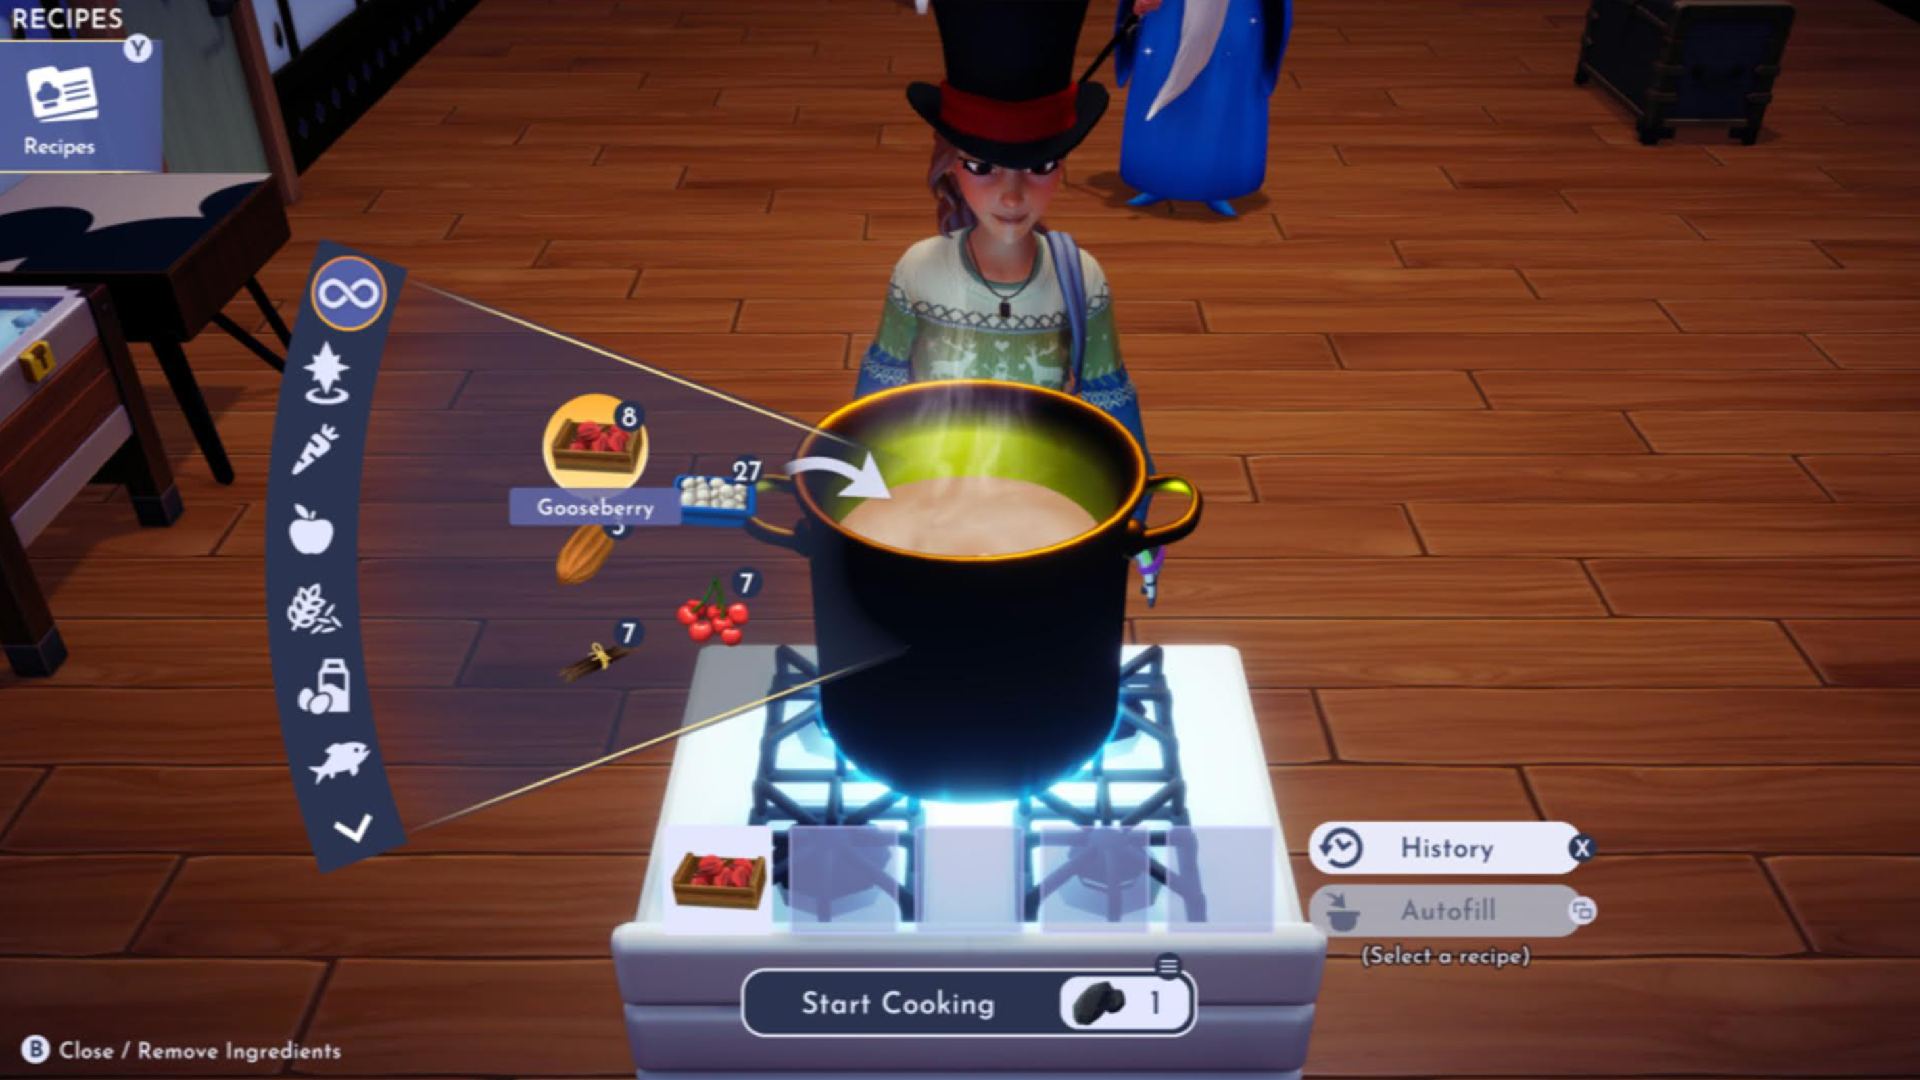 Disney Dreamlight Valley Cooking Explaiend: The player can be seen cooking